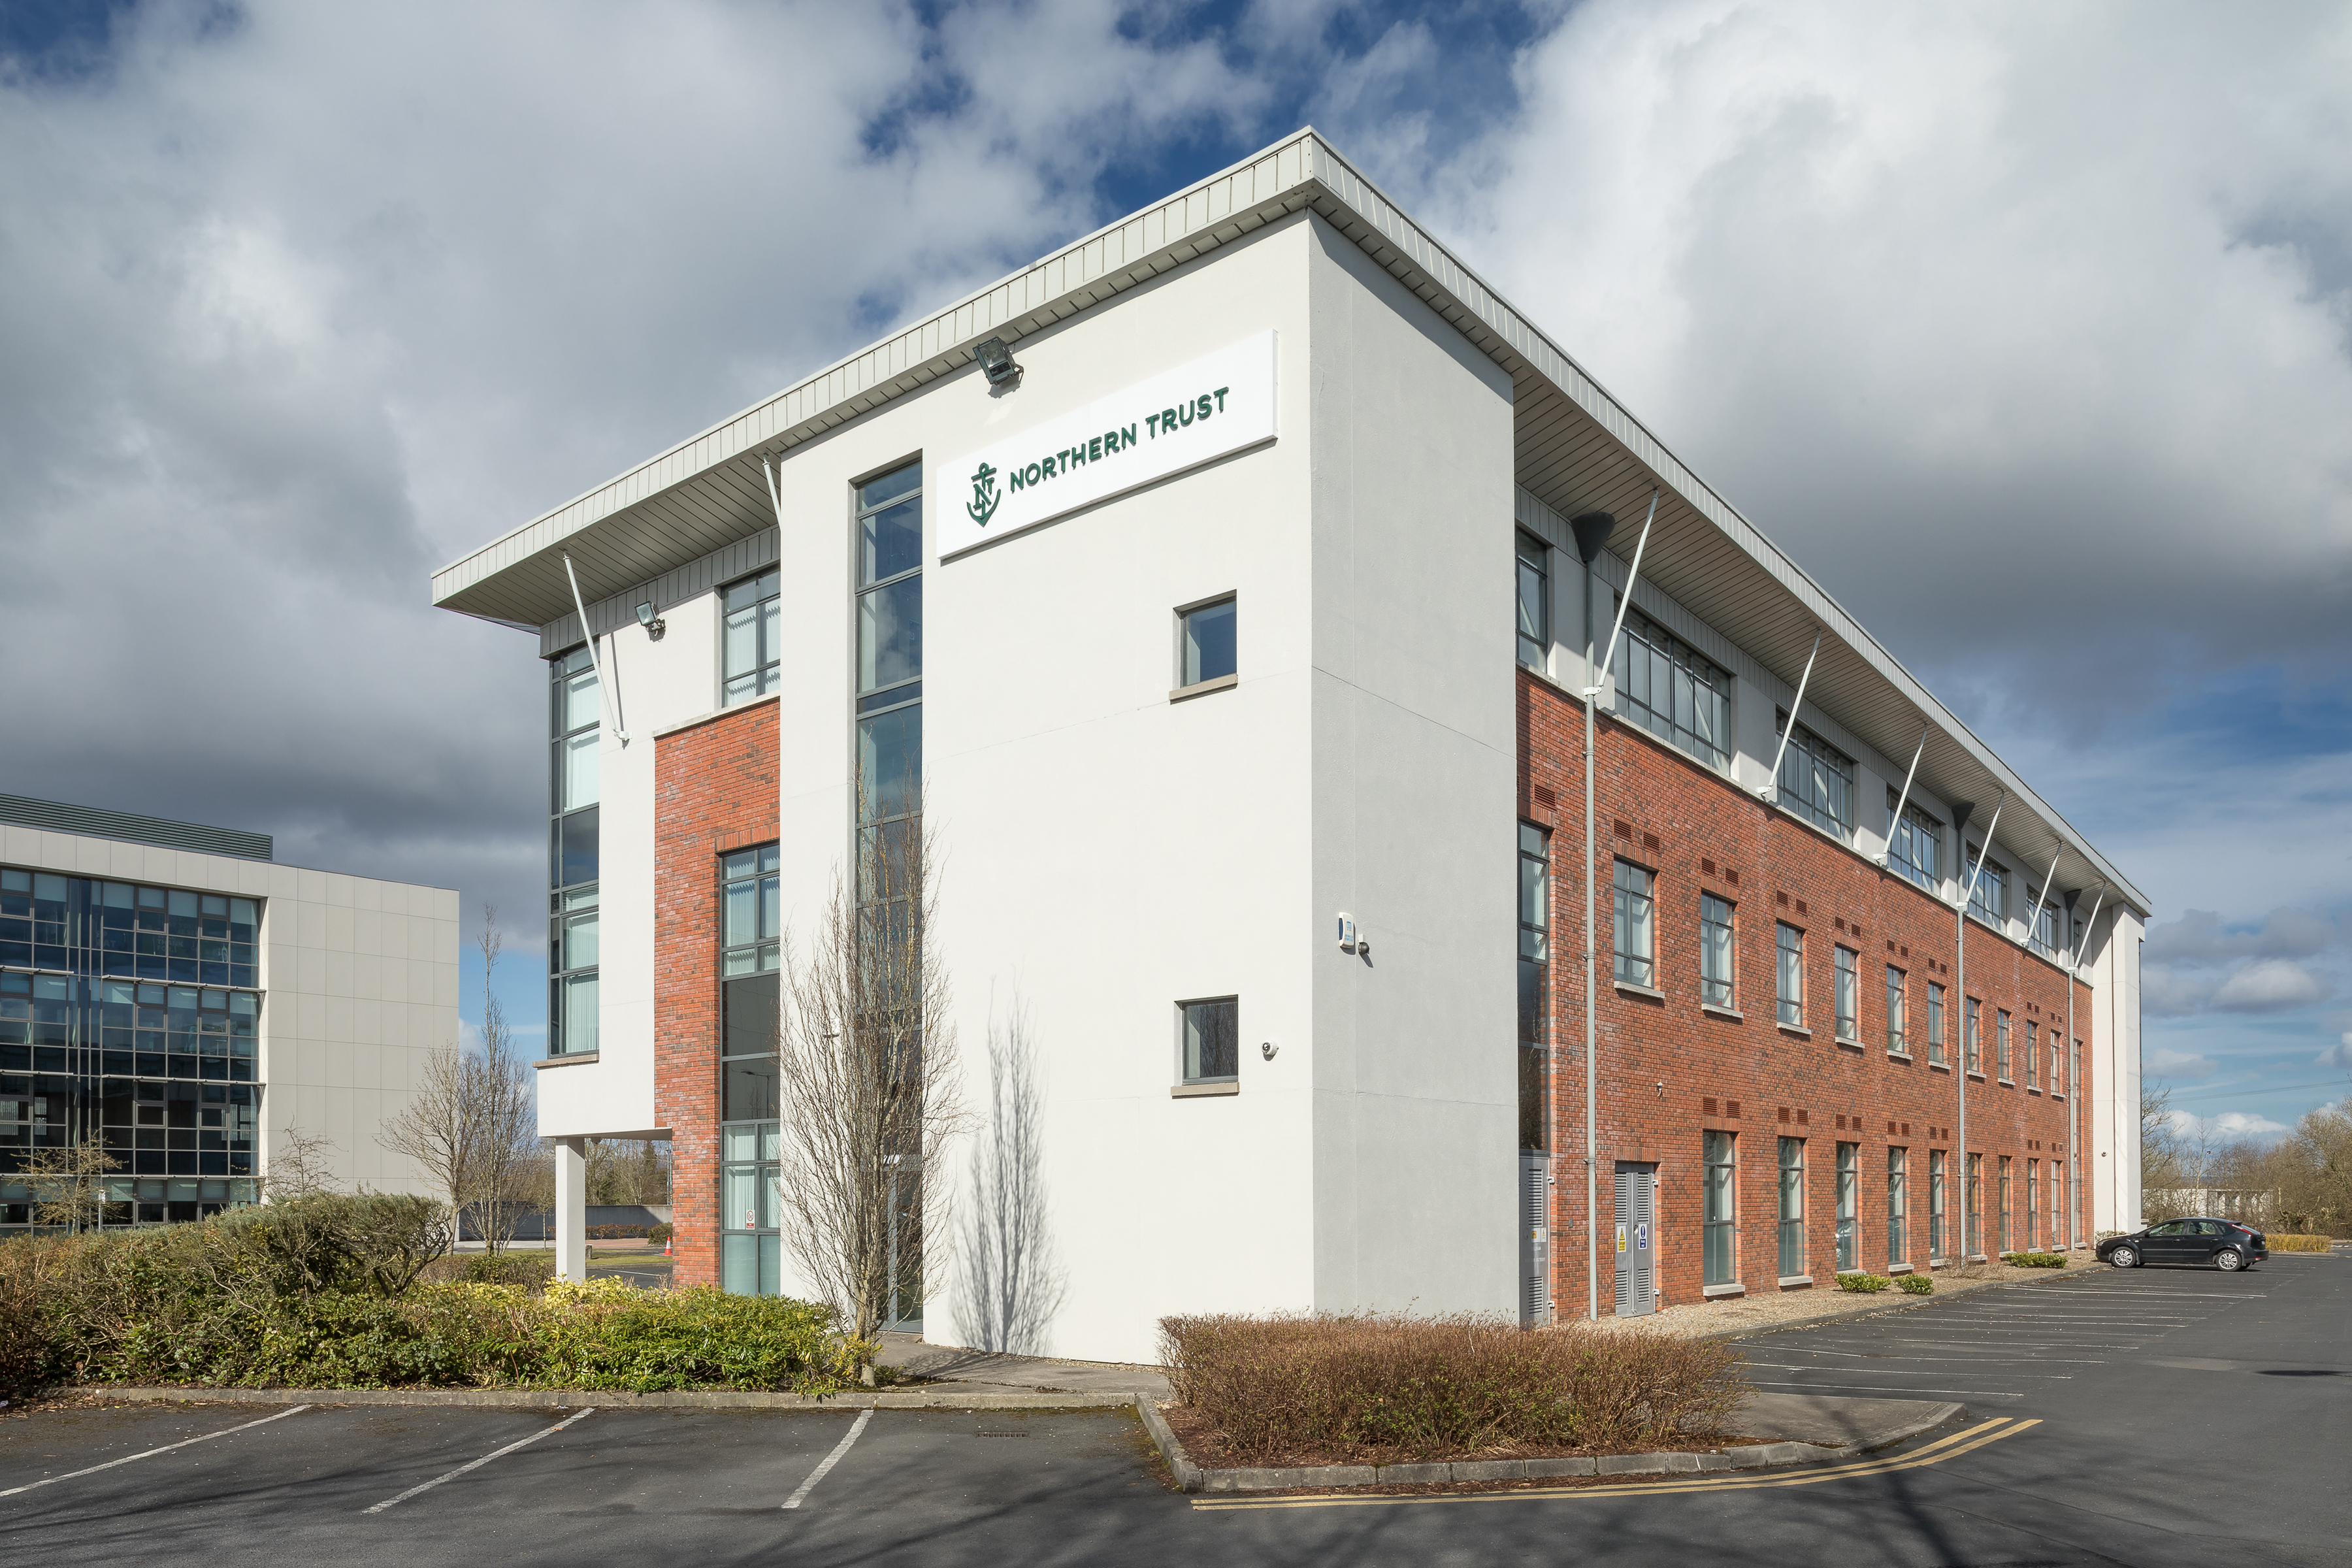 Northern Trust - Exponential growth for a global company in Limerick